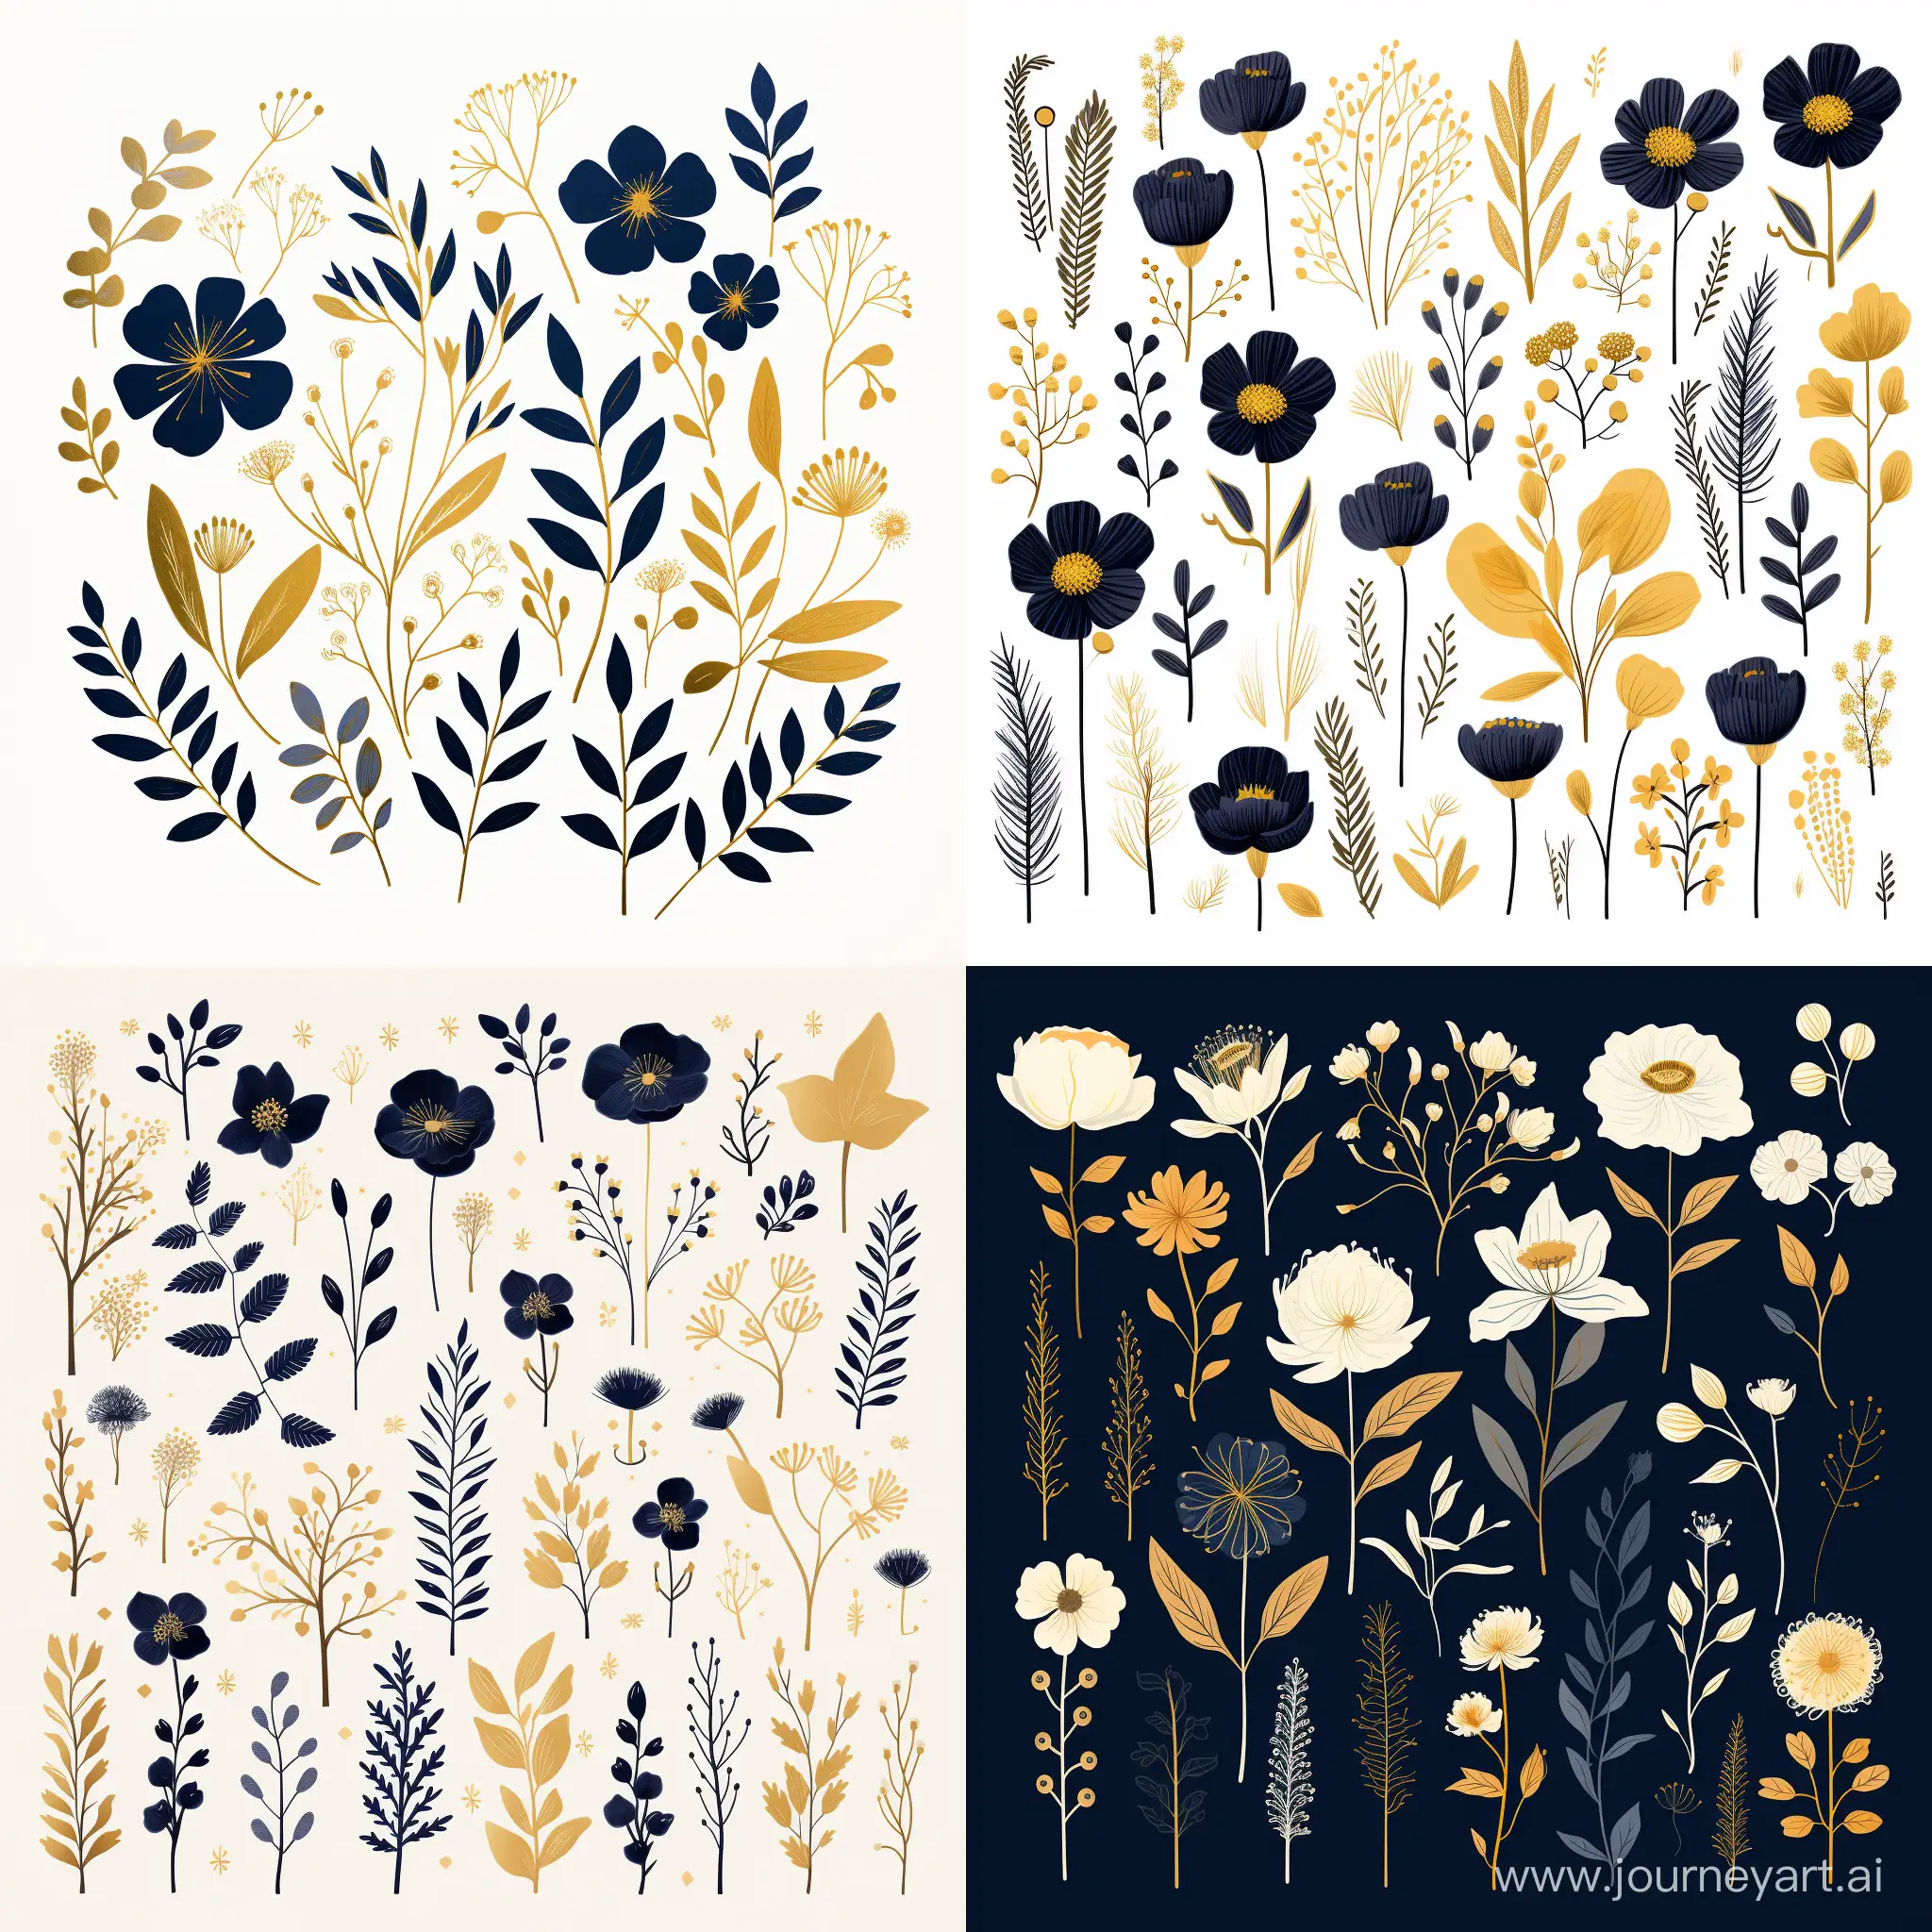 Minimalistic navy and gold Botanical Wildflower clipart